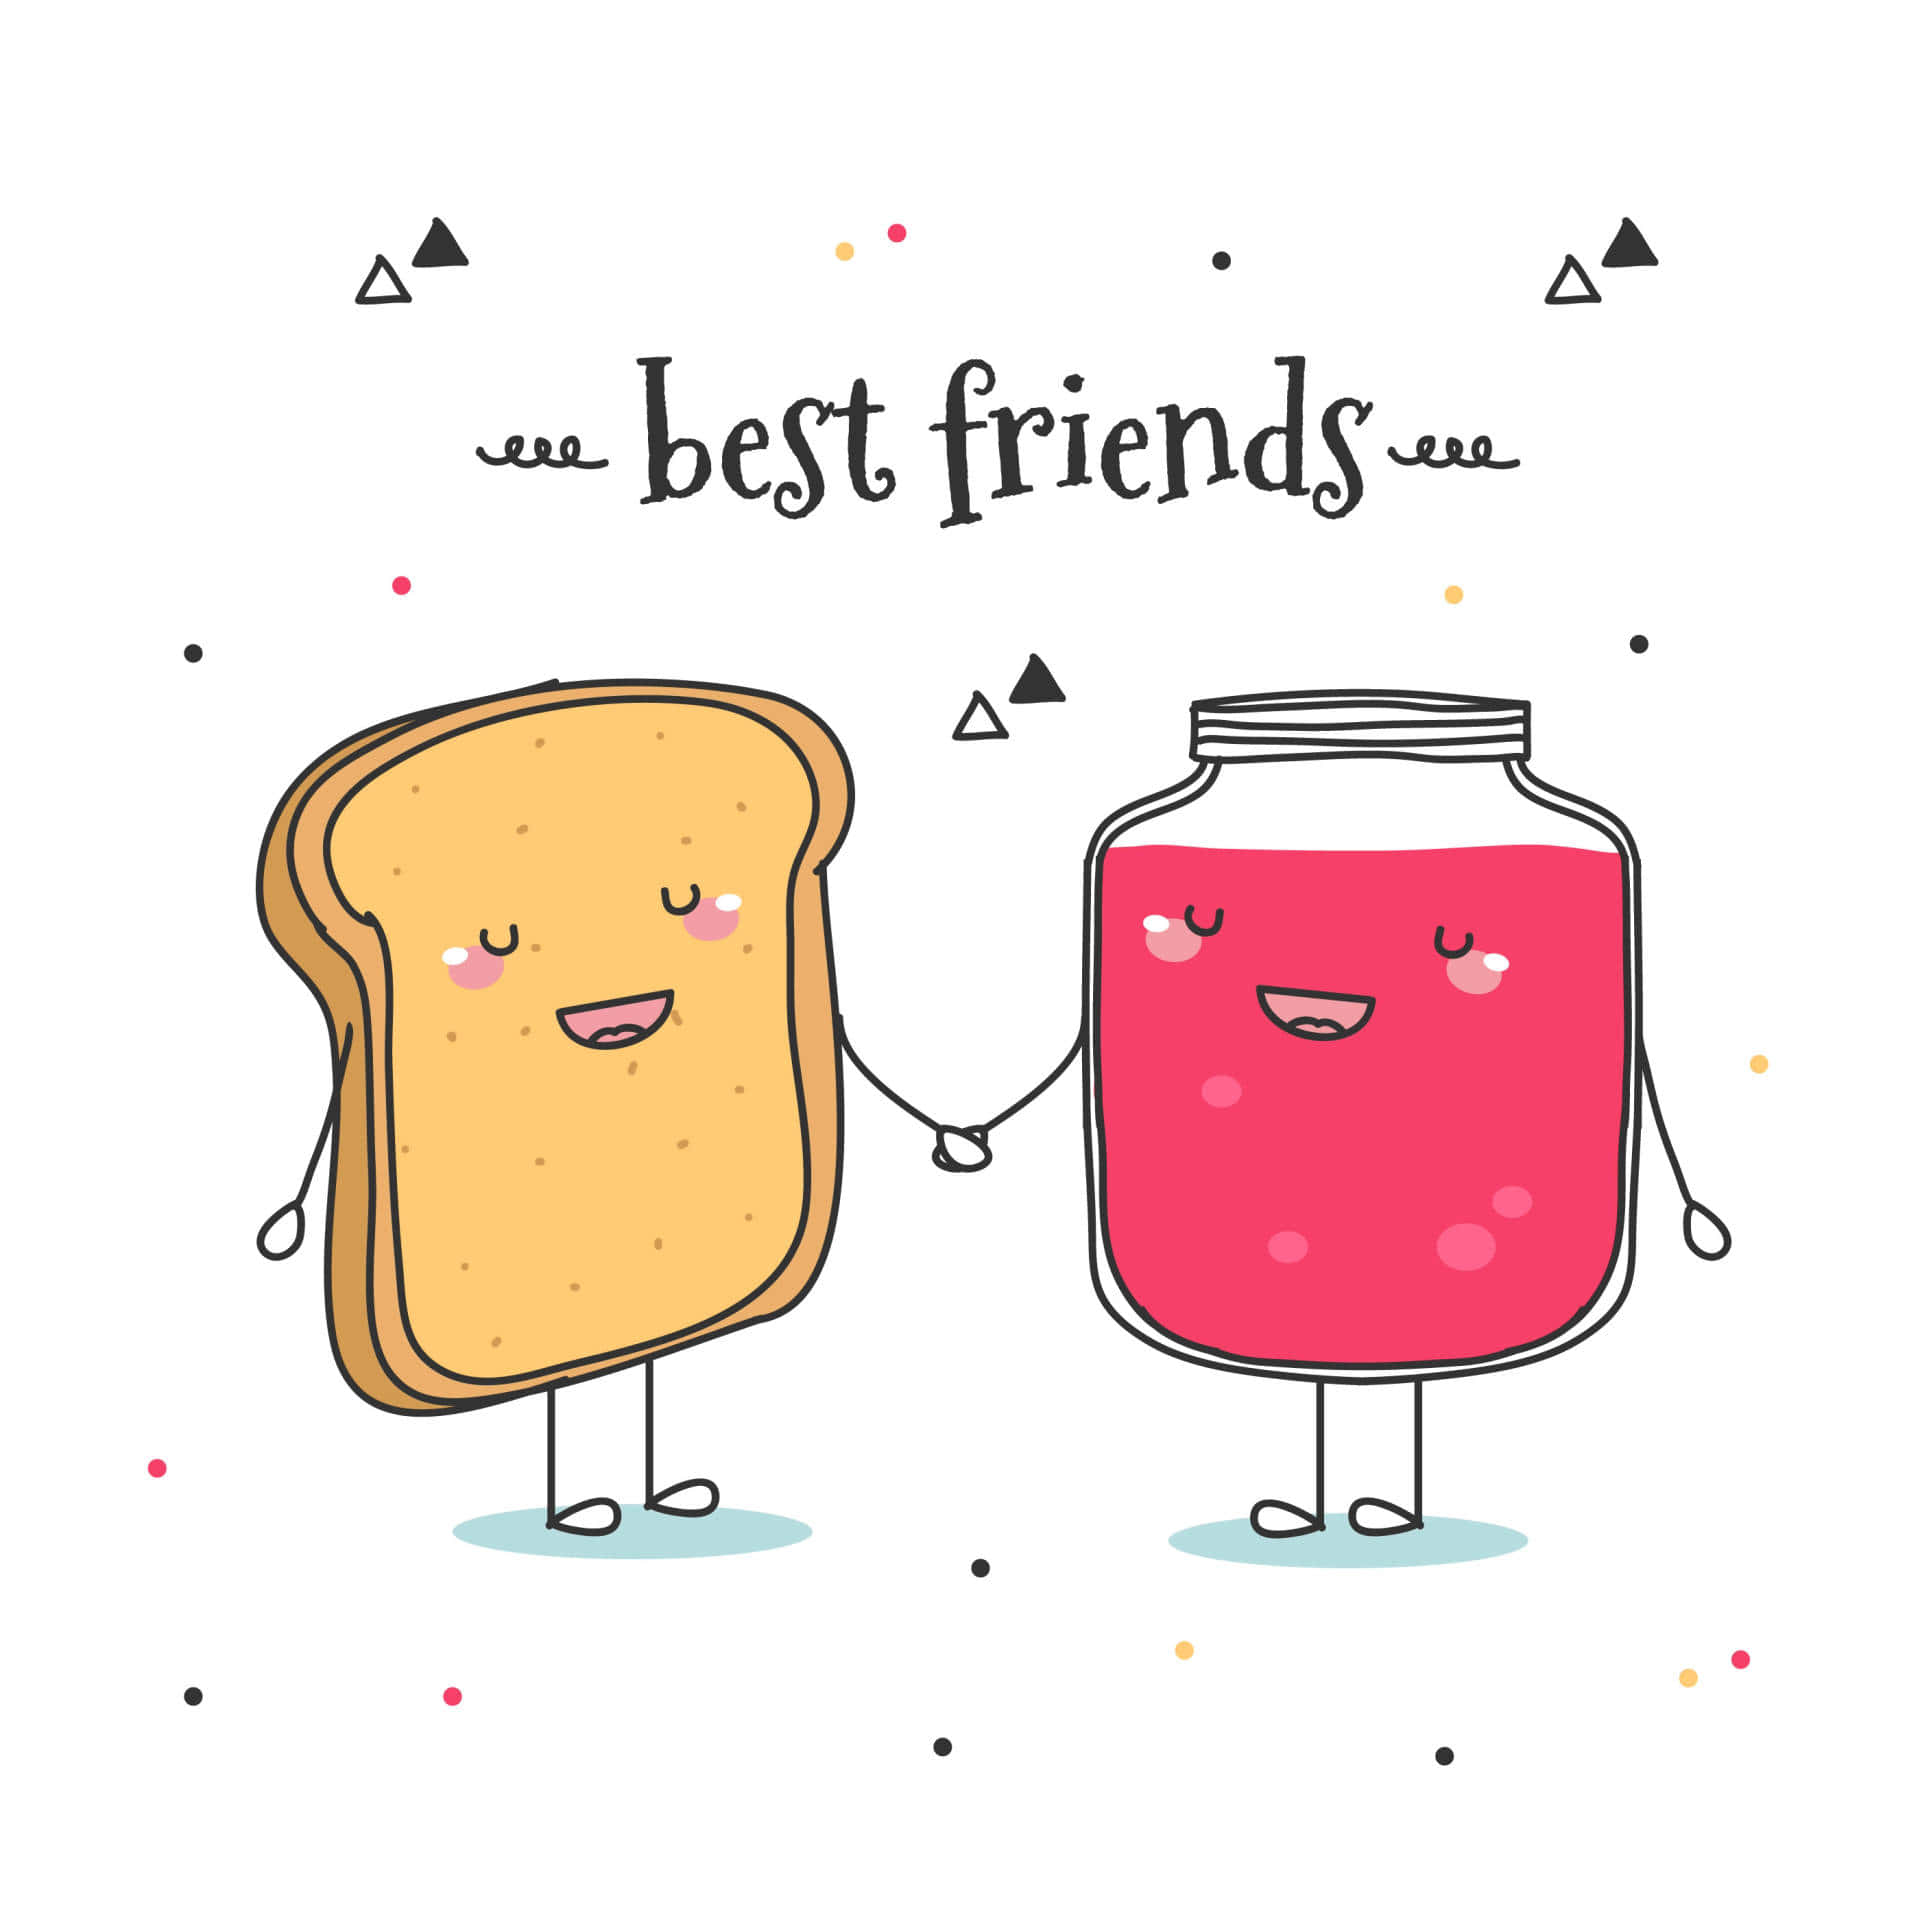 Two Cartoon Friends Holding Toast And Jam Wallpaper